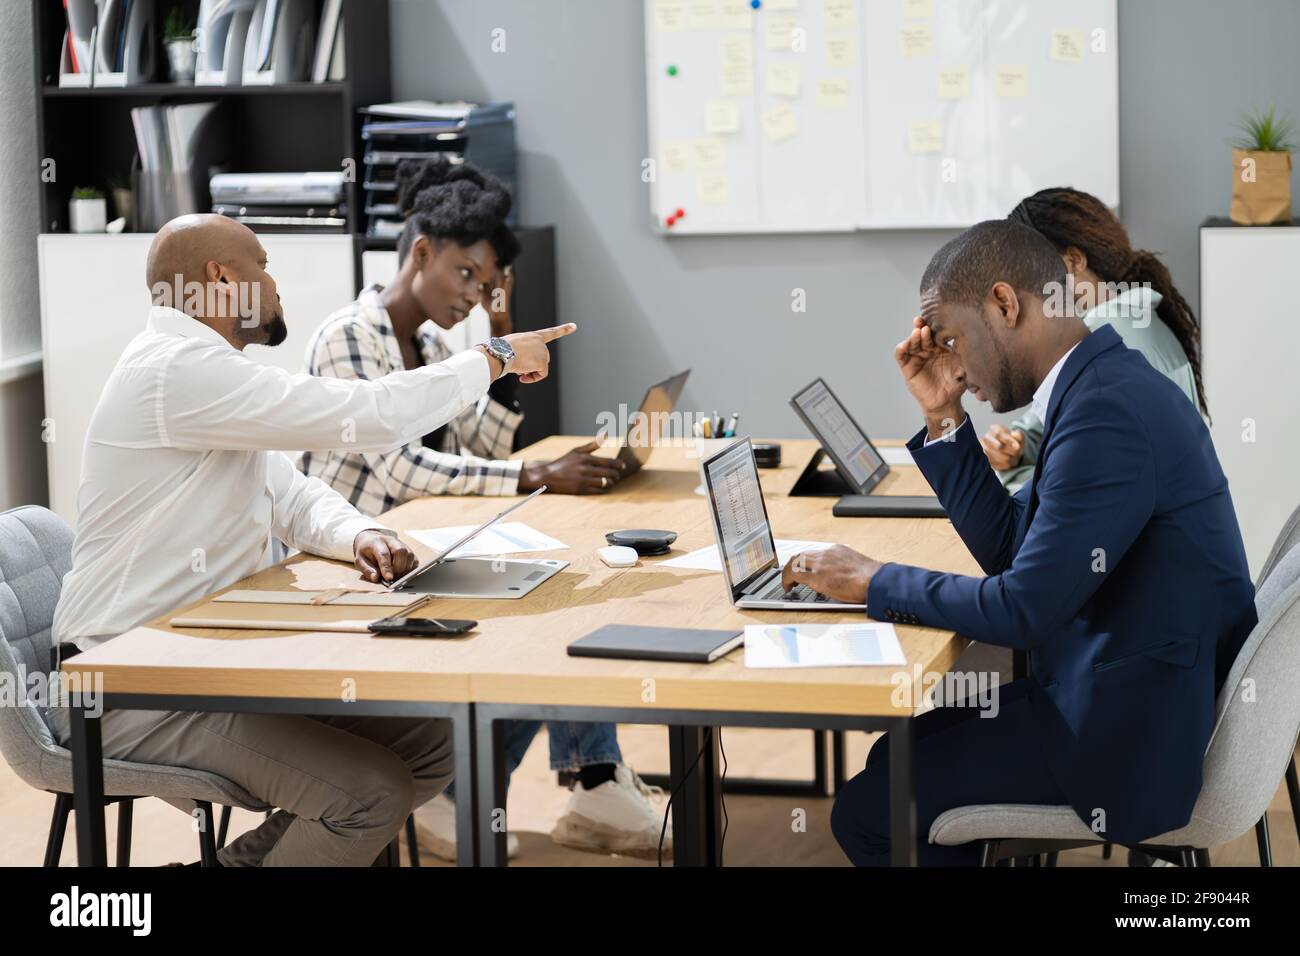 Angry Office Business Meeting Argument. African Group Arguing And Fighting Stock Photo